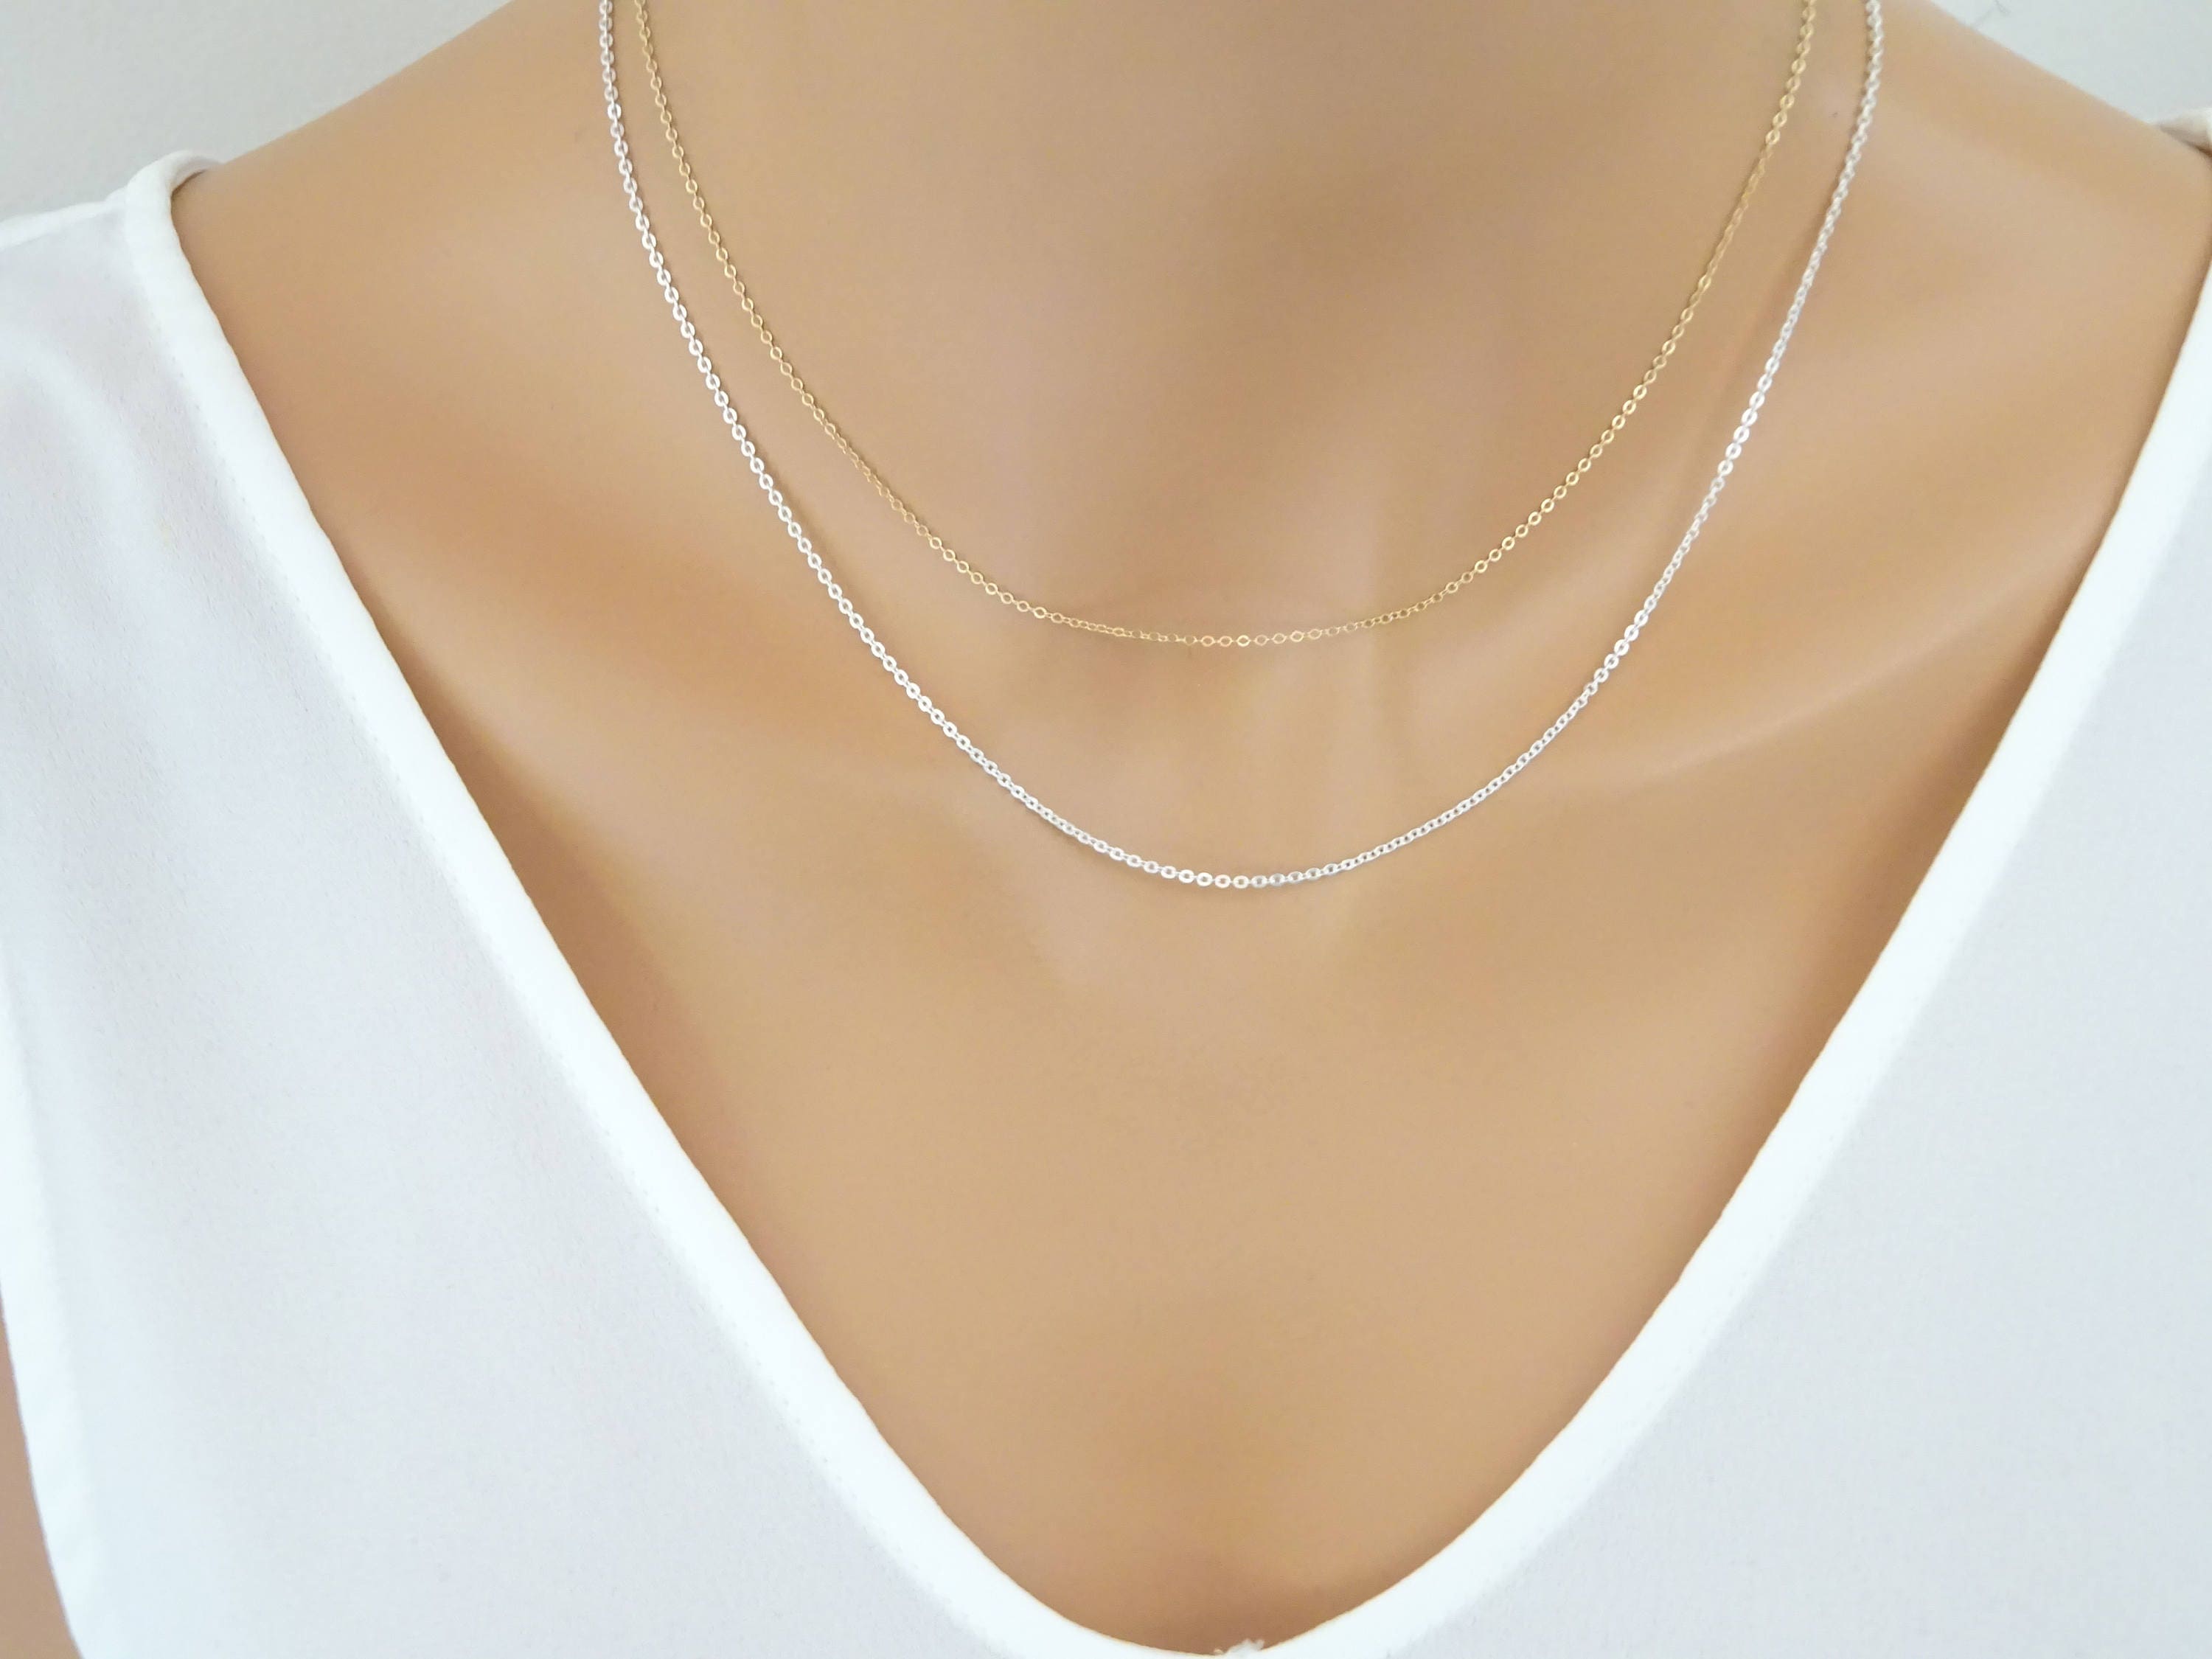 Plain Chain Necklace Fine Sterling Silver Chain Thin Cable